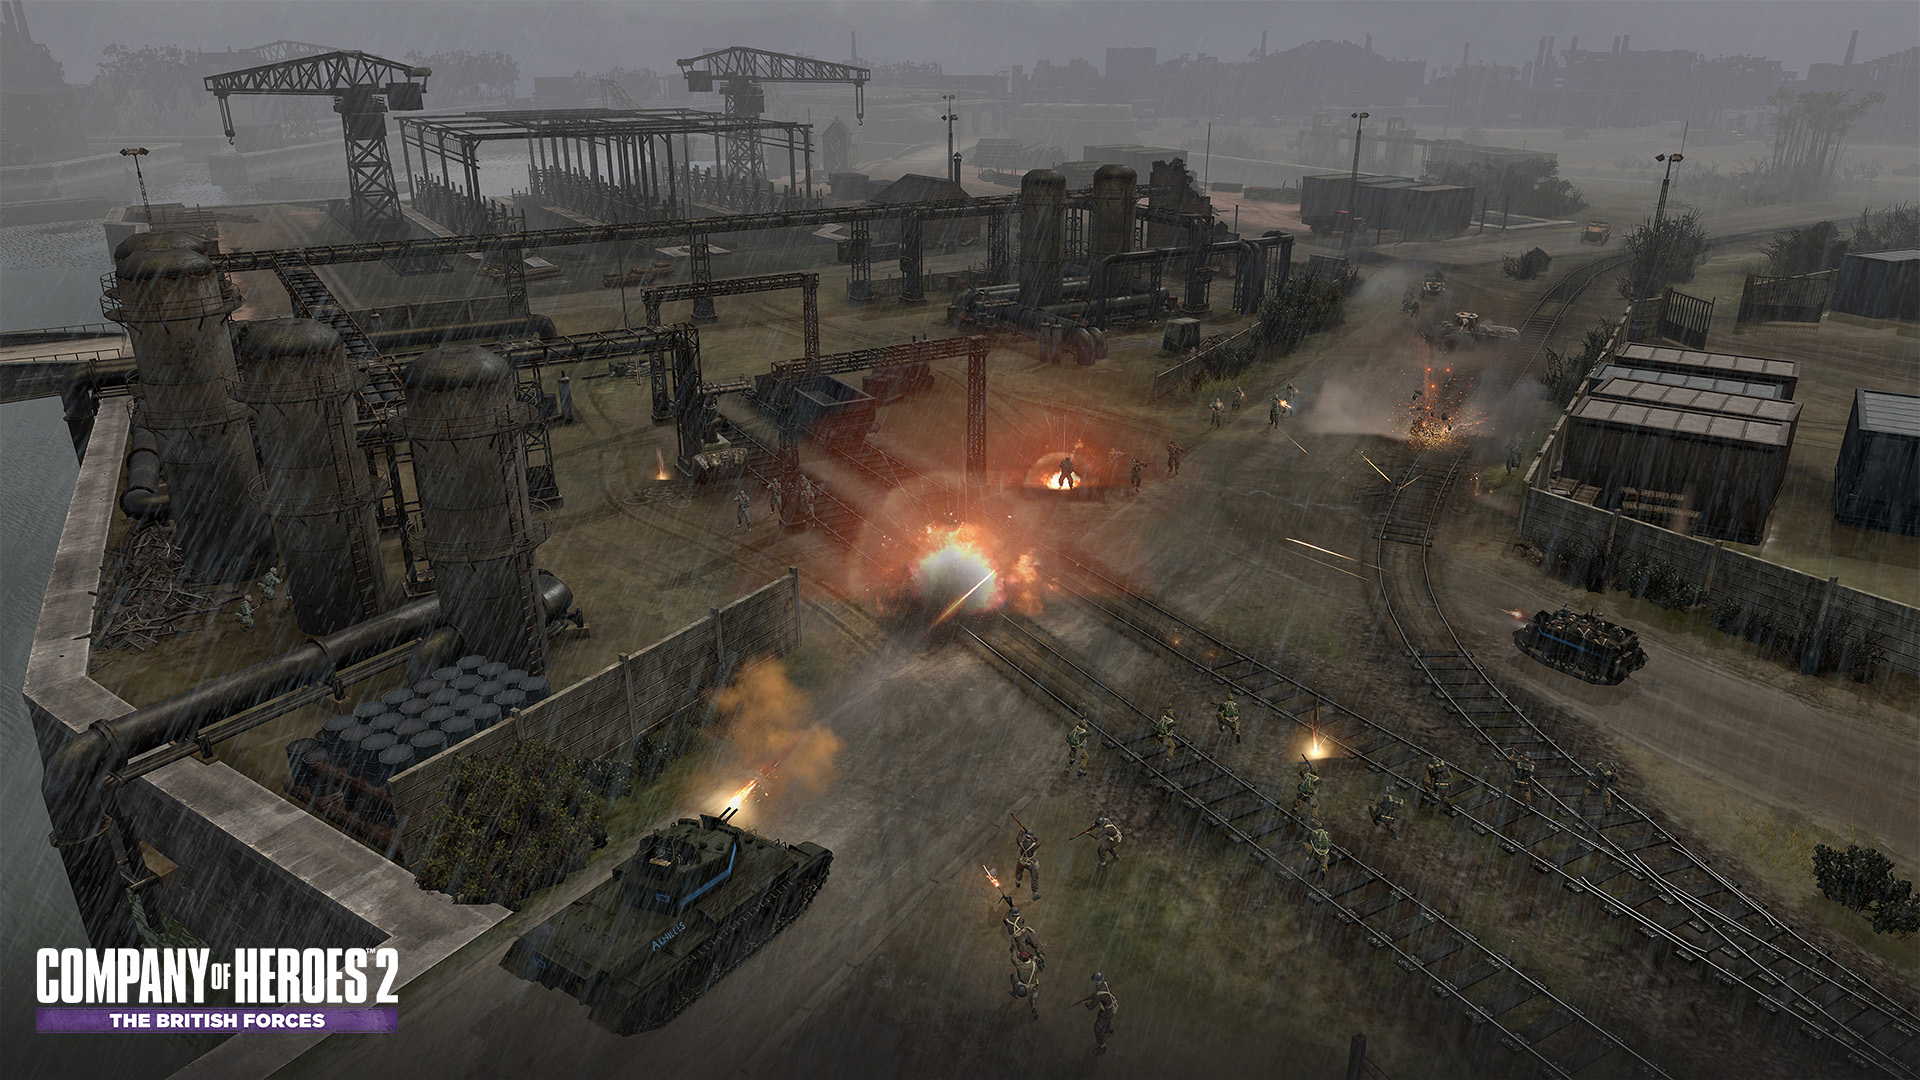 COMPANY OF HEROES 2: THE BRITISH FORCES (2015)